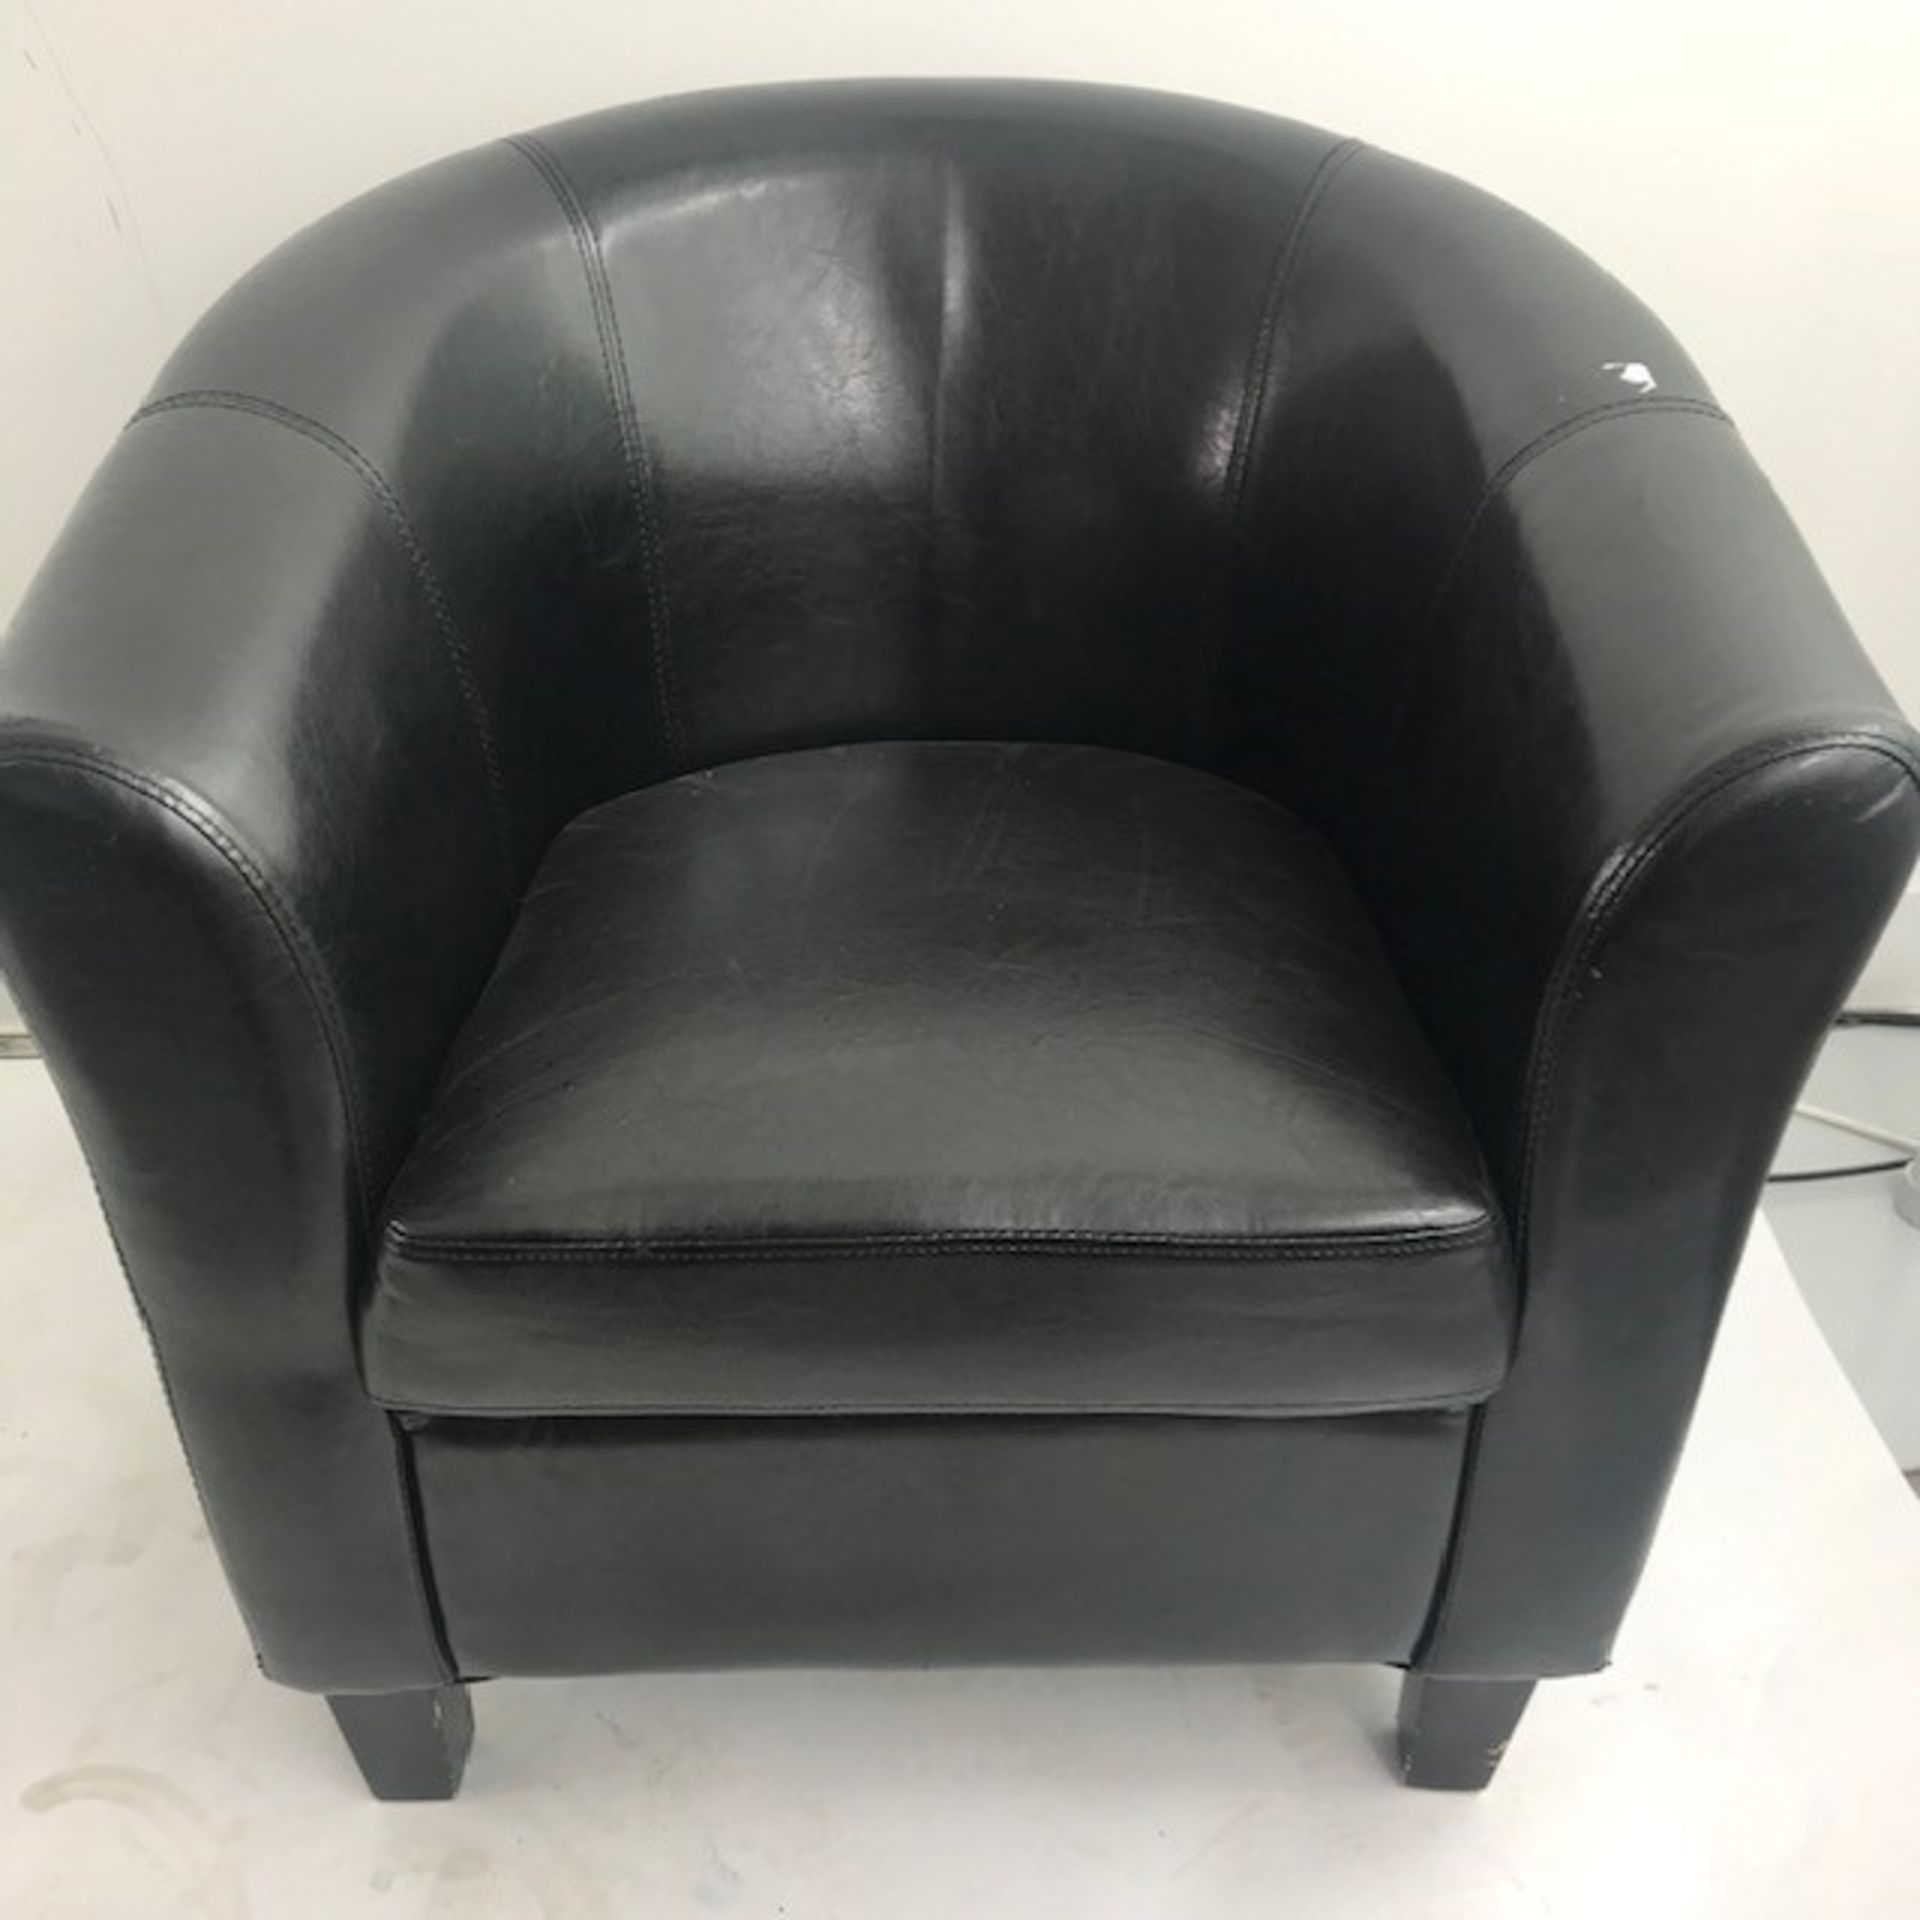 Set of 2 x Black Leather Chairs For Exhibition / Stage Presentations - Ref: 268 - CL581 -